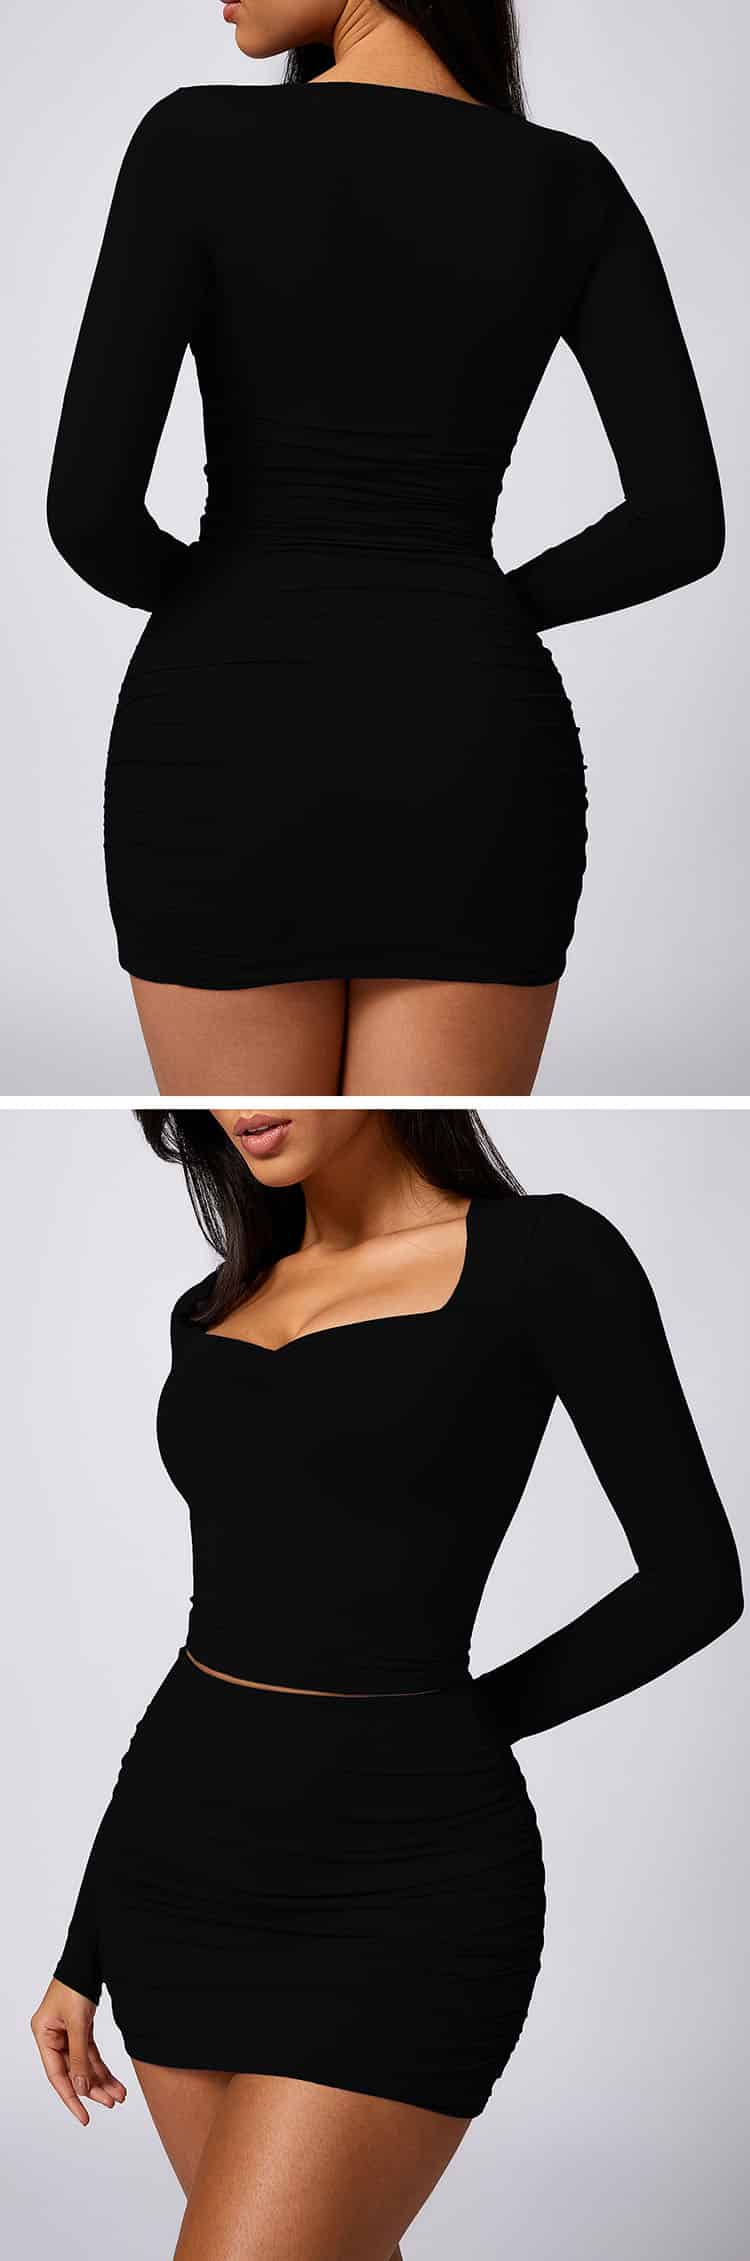 The design of lengthened hem is adopted to cover excess fat and make the visual effect slim